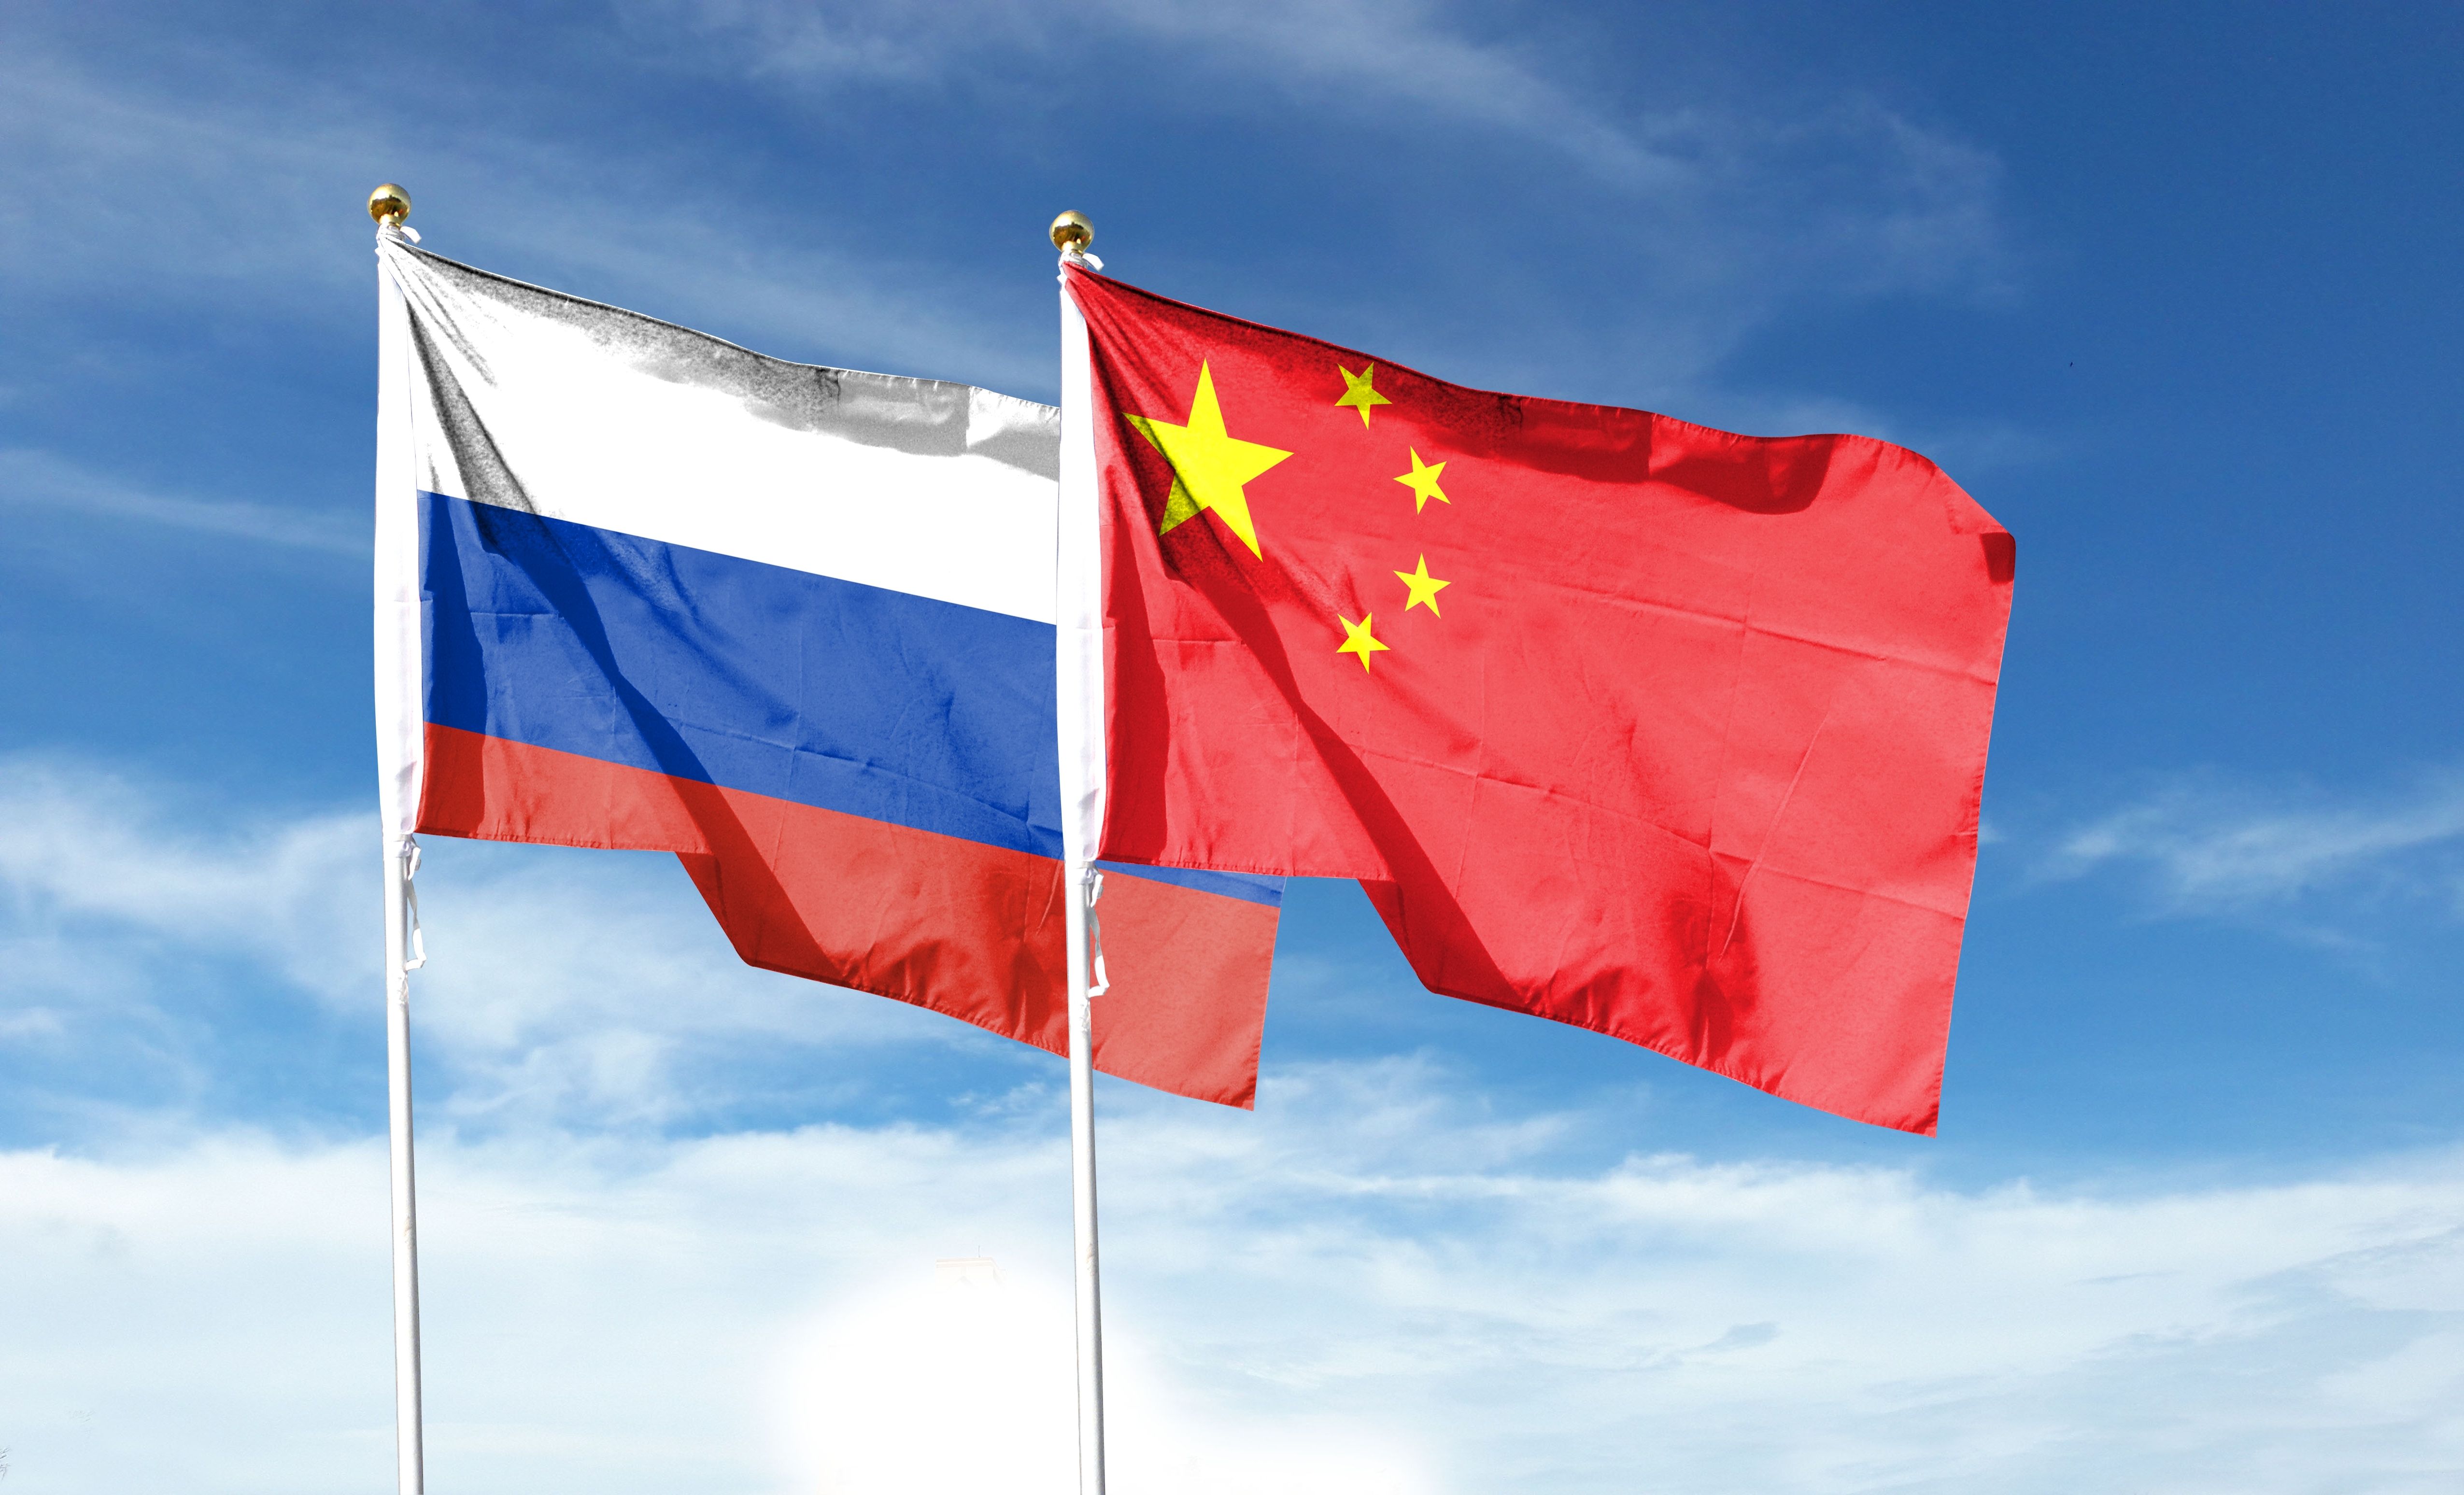 Russian flag and Chinese flag on the cloudy sky. Wave in the sky